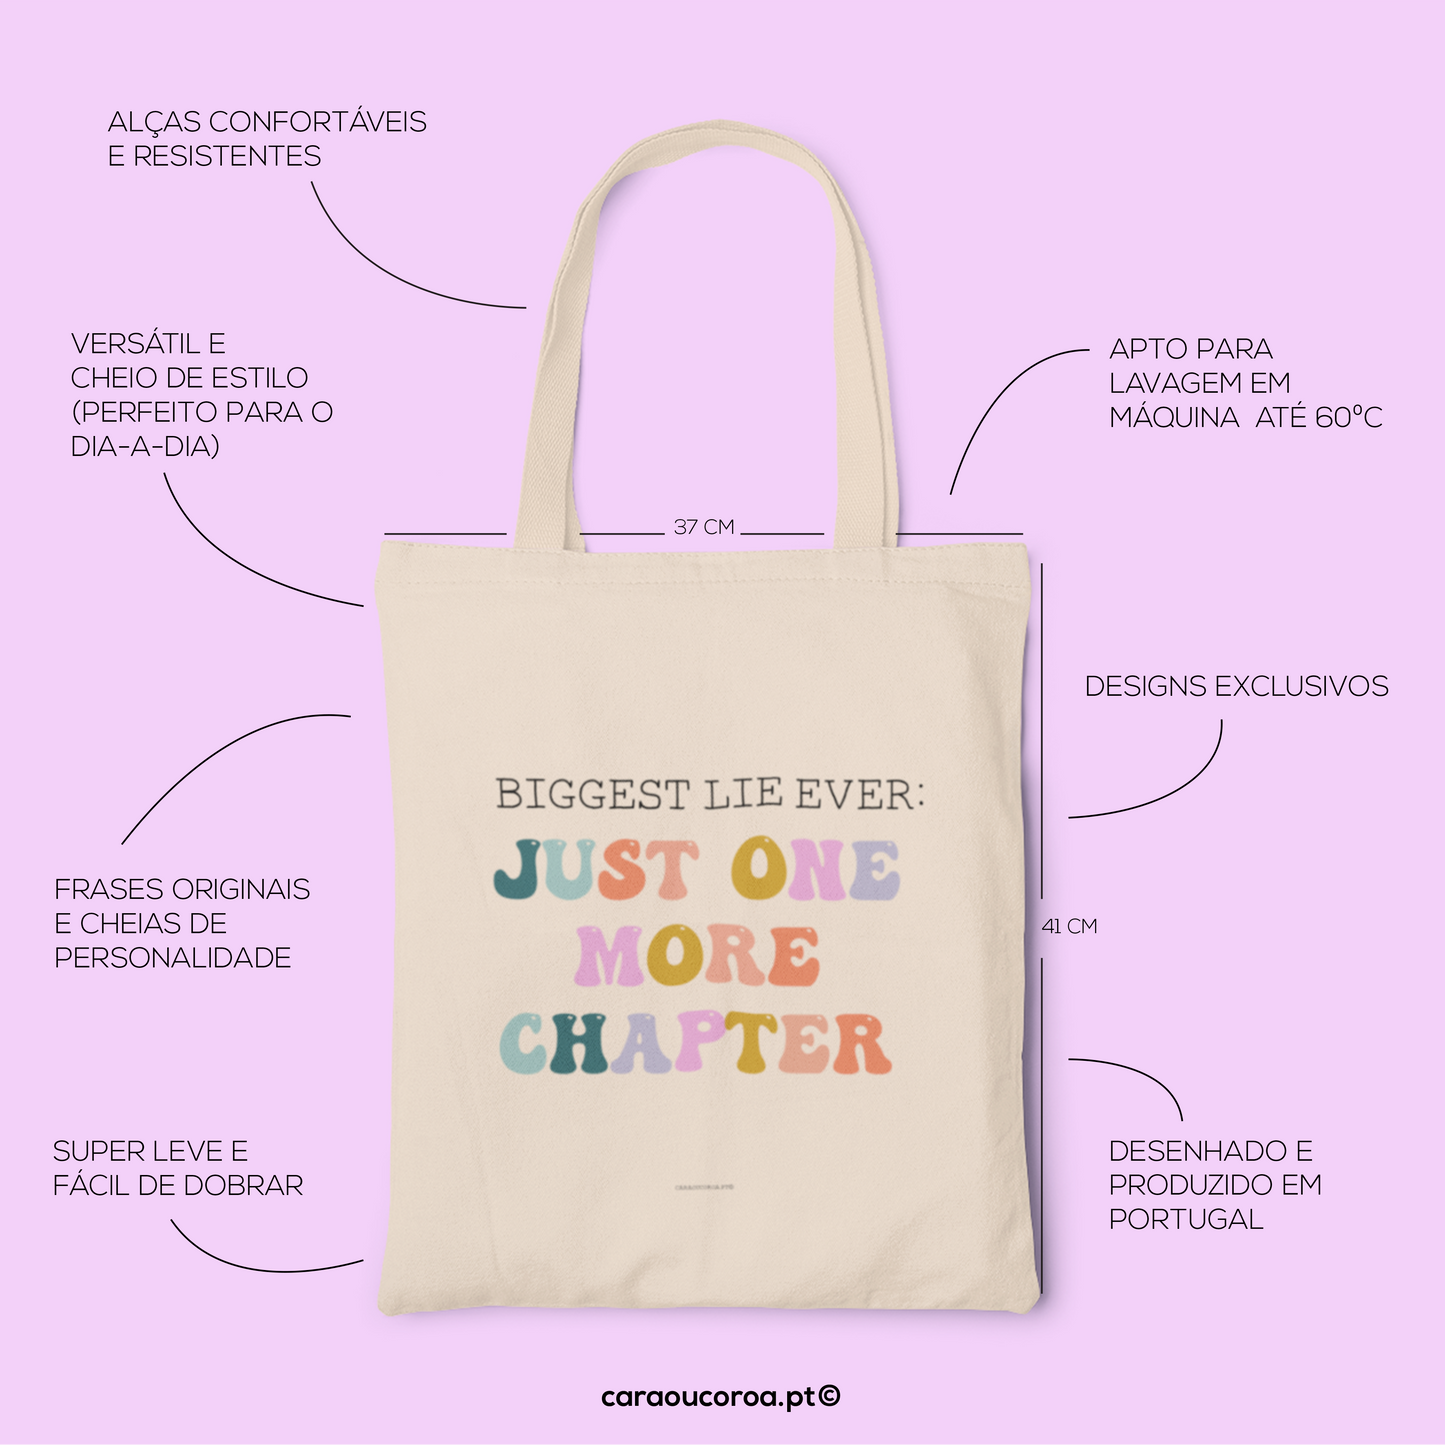 Tote Bag "Just One More Chapter"